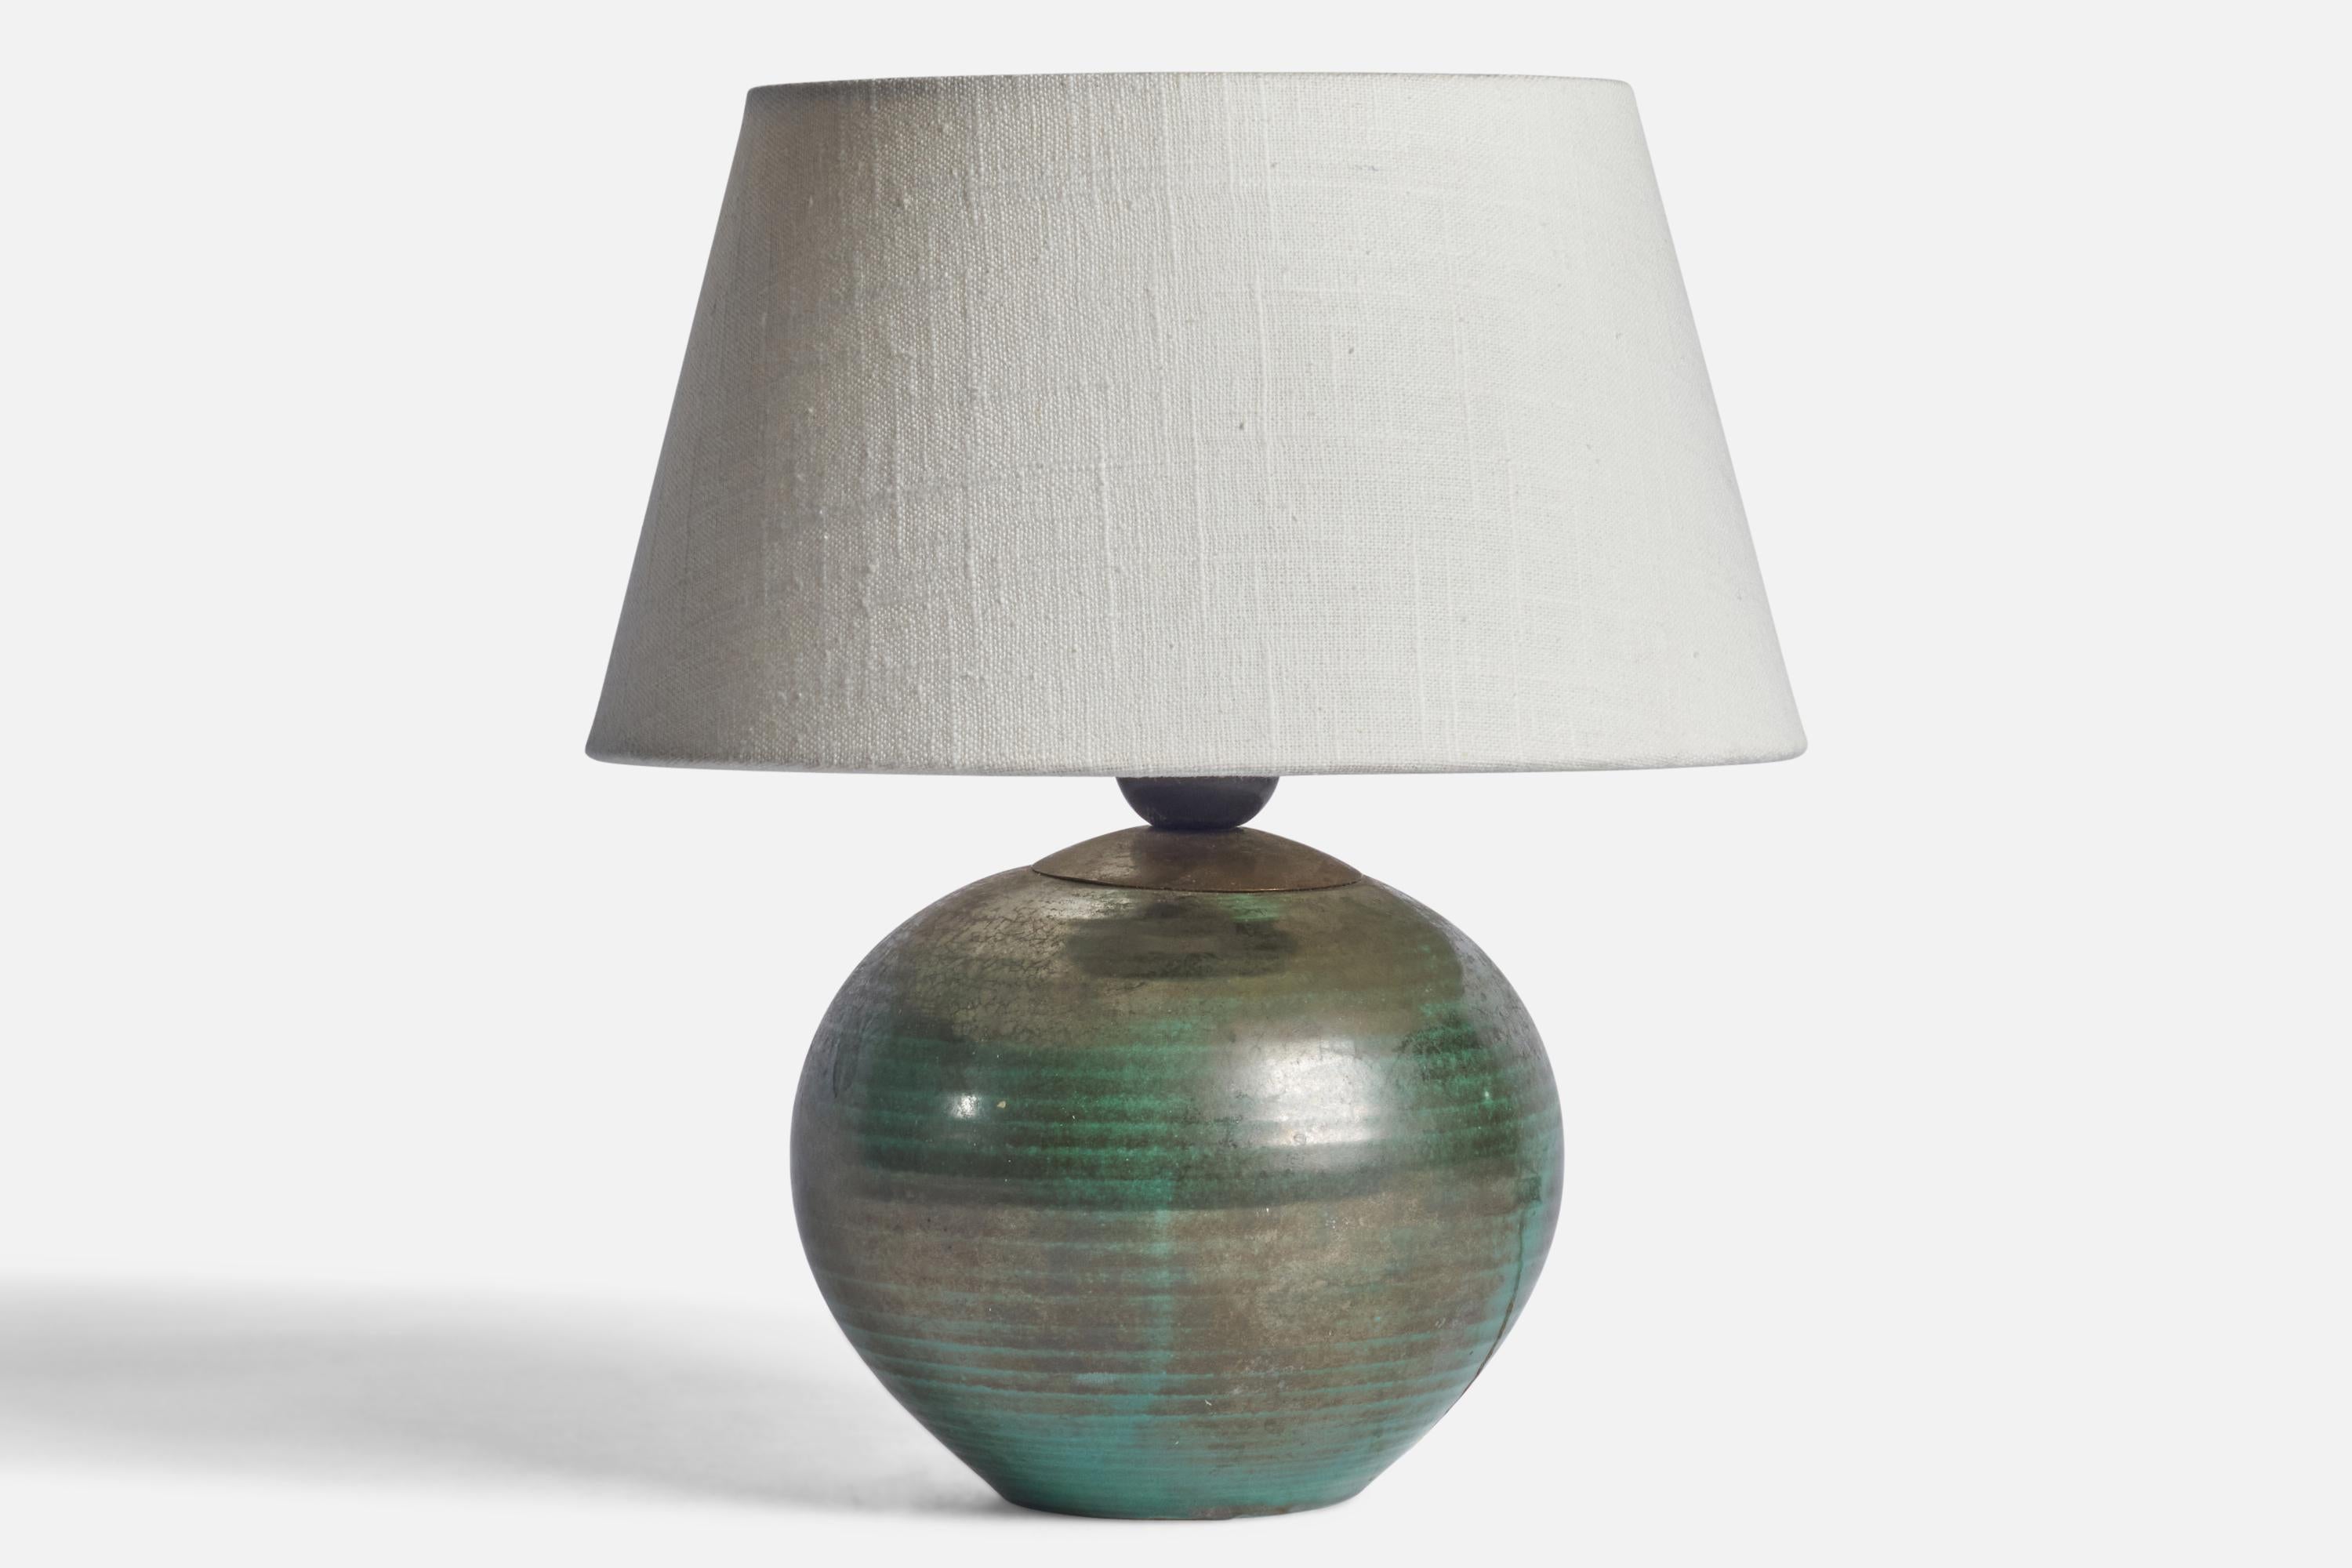 A green-glazed and incised earthenware table lamp designed and produced by Upsala Ekeby, Sweden, 1930s.

Dimensions of Lamp (inches): 8.75” H x 6”Diameter
Dimensions of Shade (inches): 7” Top Diameter x 10” Bottom Diameter x 5.5” H
Dimensions of